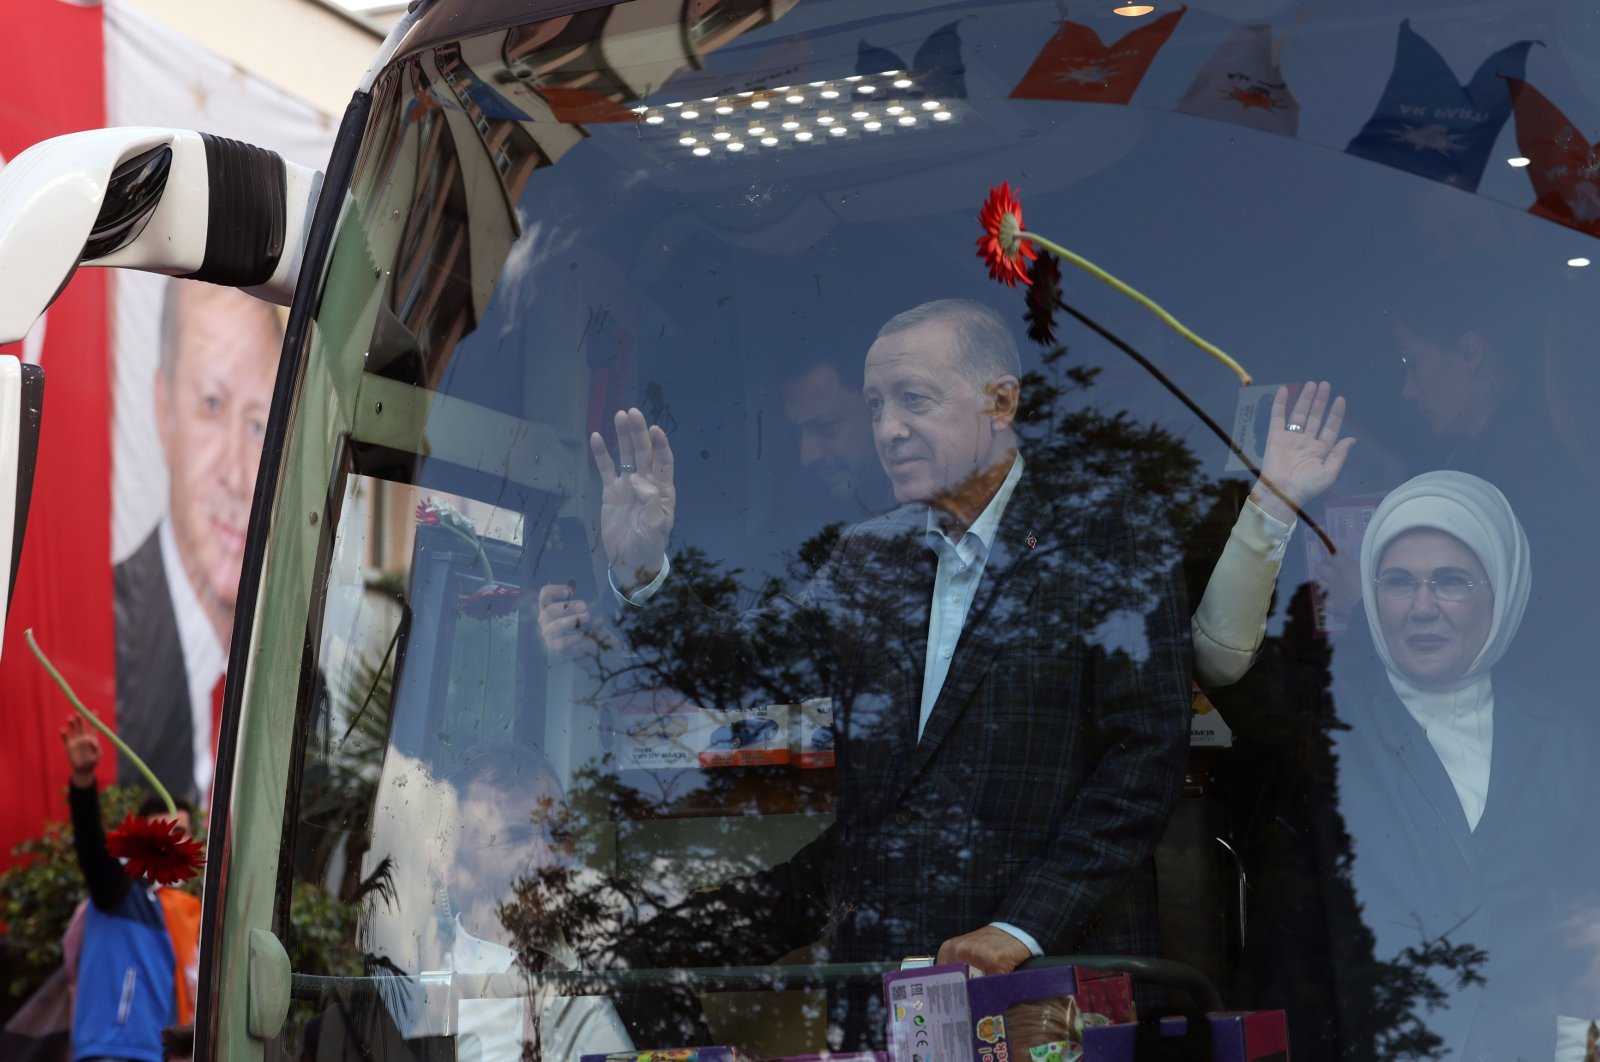 President Recep Tayyip Erdoğan and his wife Emine Erdoğan greet supporters during a rally in Izmir, April 29, 2023. (AA File Photo)